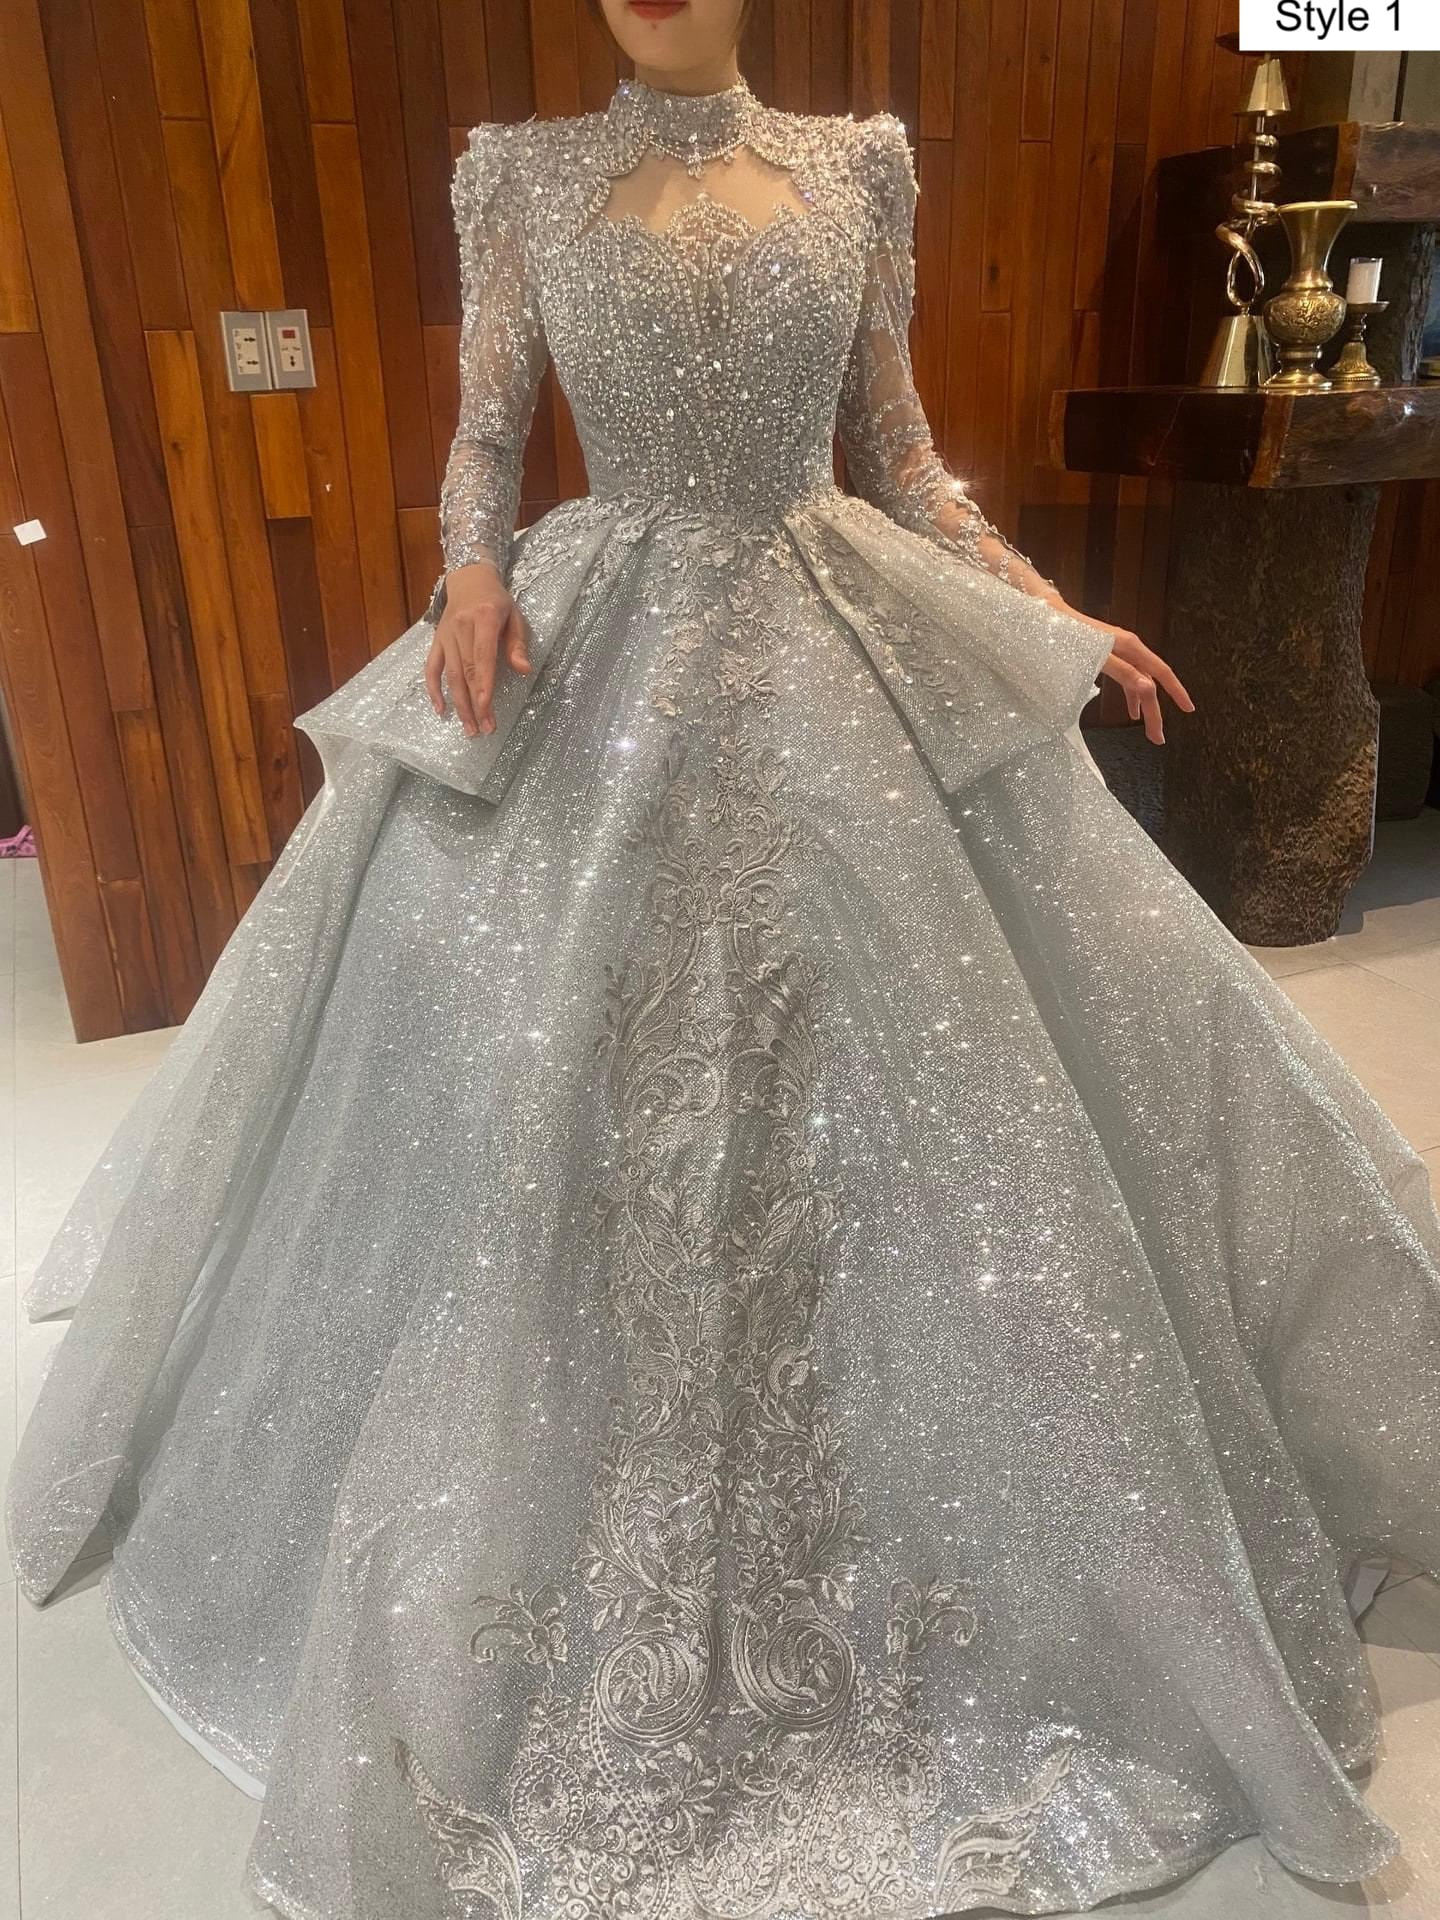 Ball Gown Elegant Satin Silver Wedding Dress,Ball Gown Lace Bridal Gown,2020  Wedding Dress,557 · muttie dresses · Online Store Powered by Storenvy